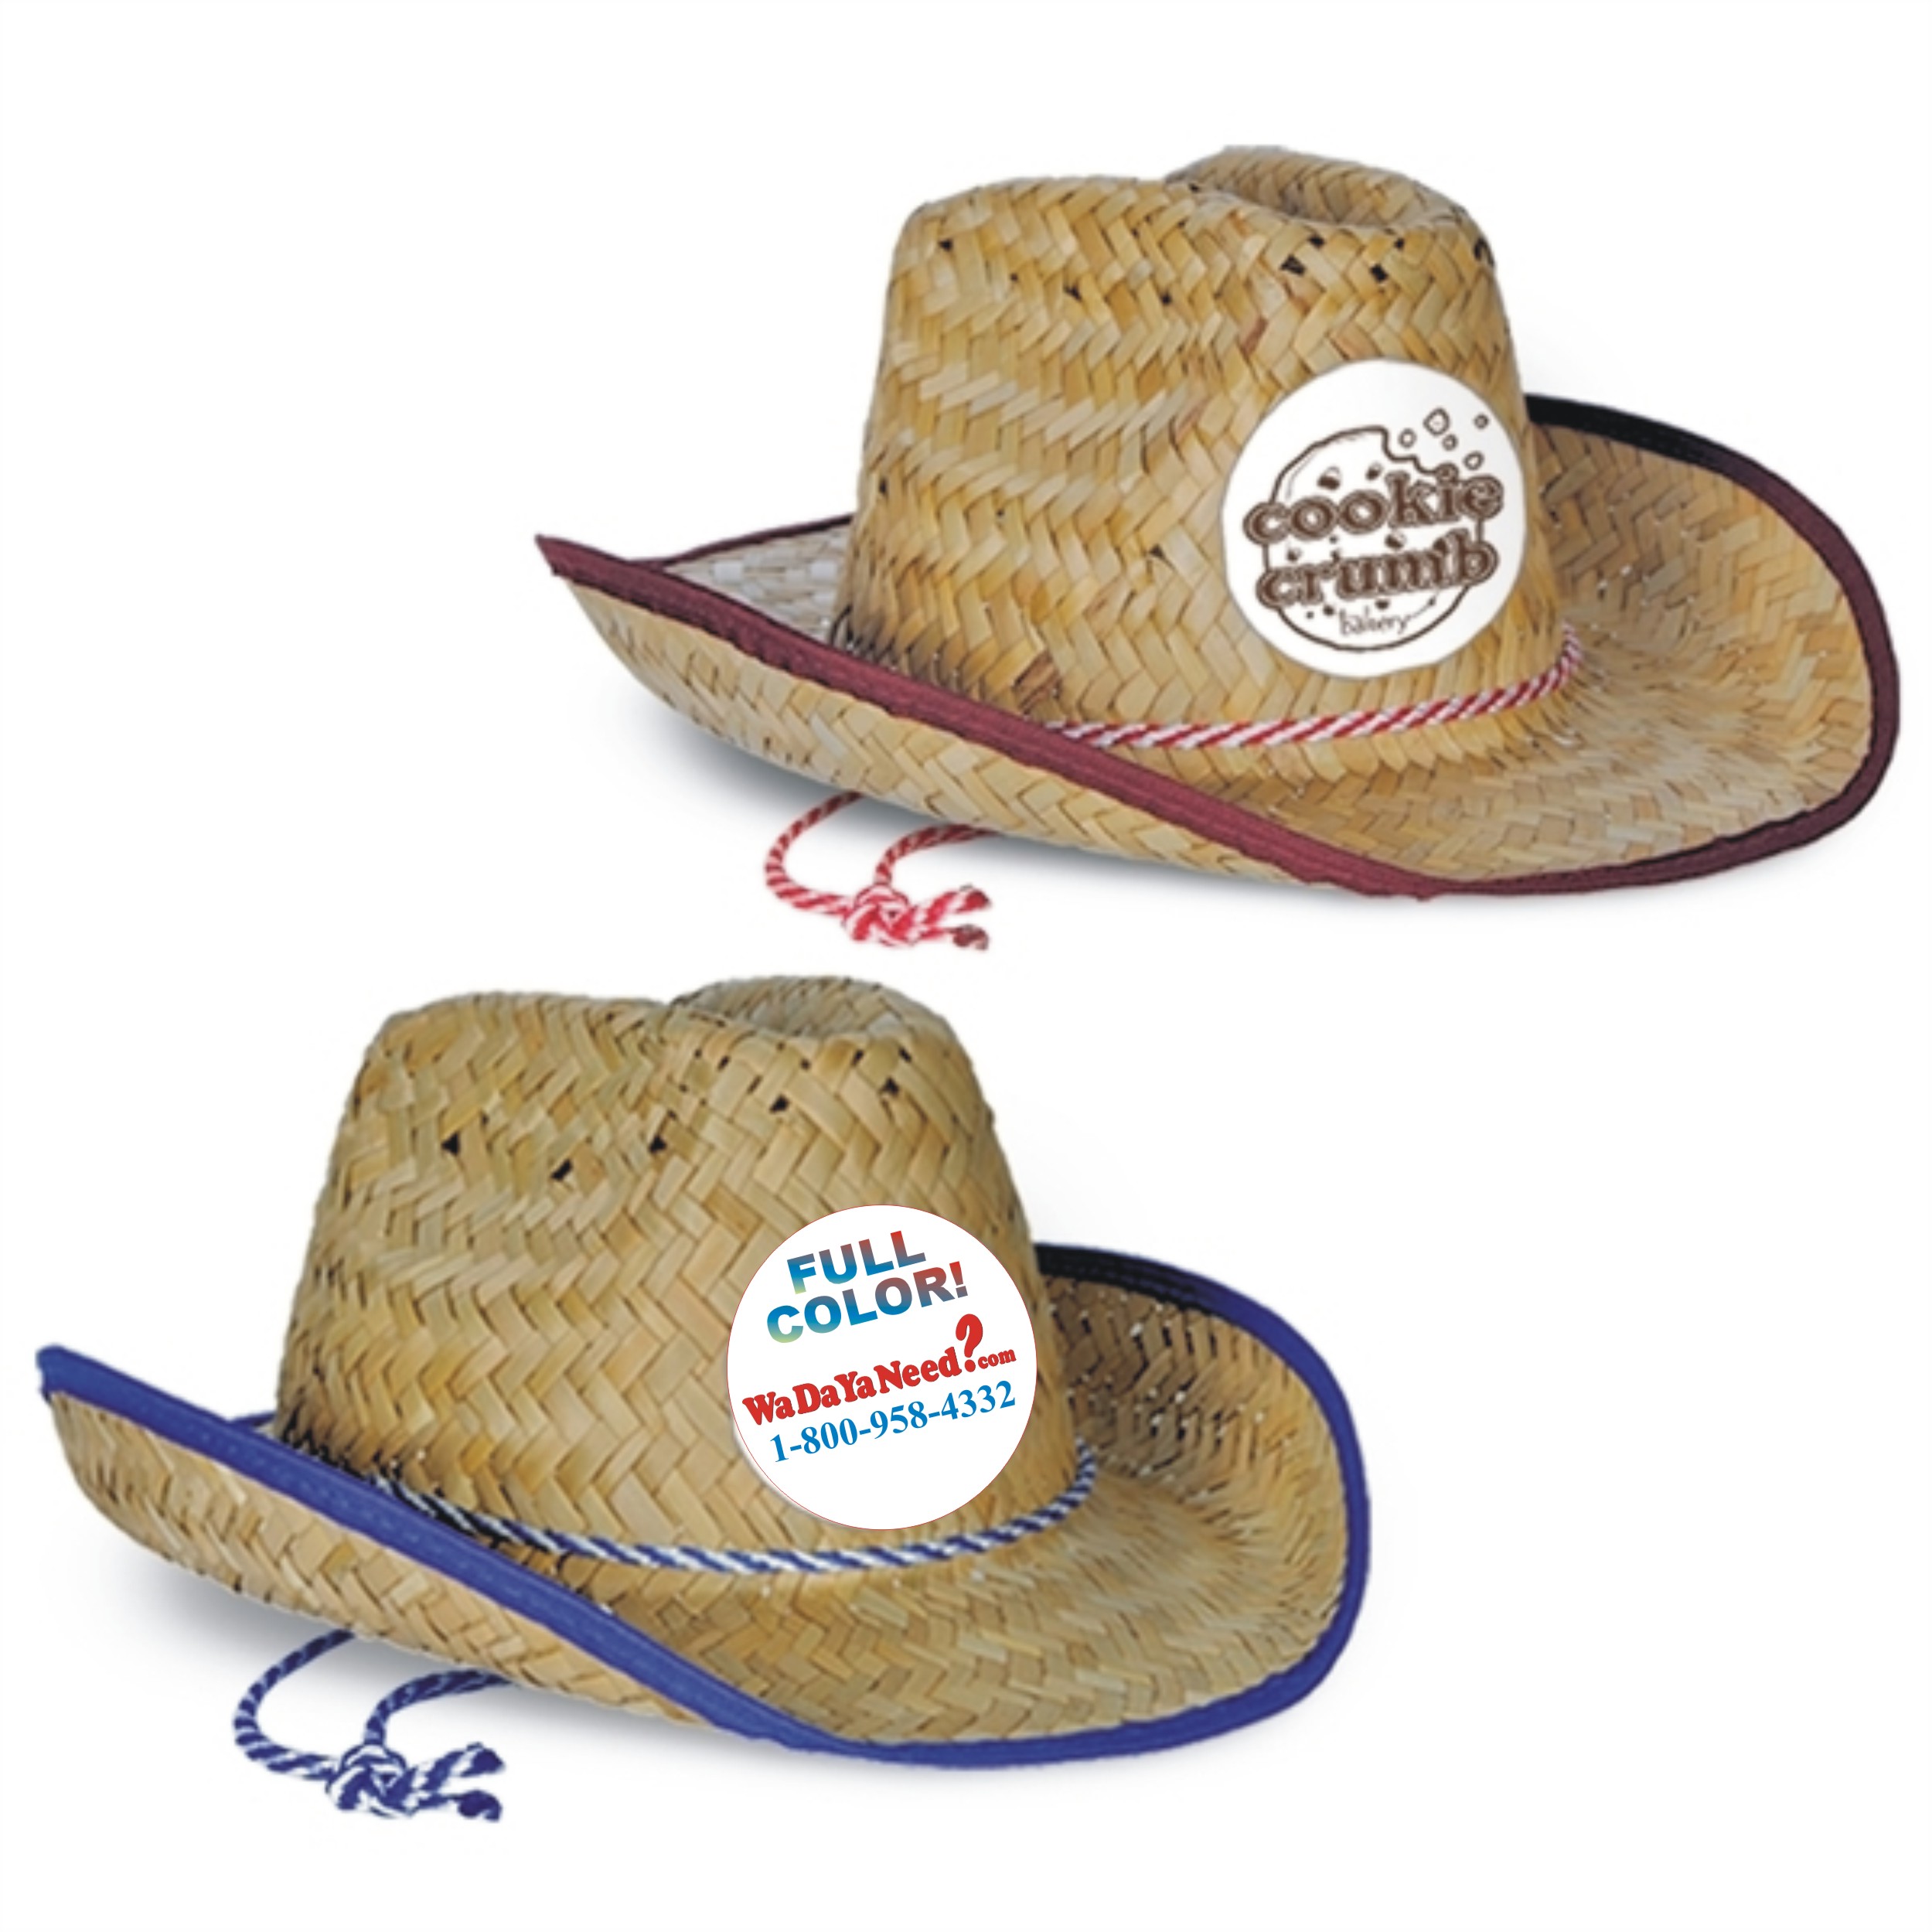 Full Color Imprint Cowboy Hats, Custom Printed With Your Logo!